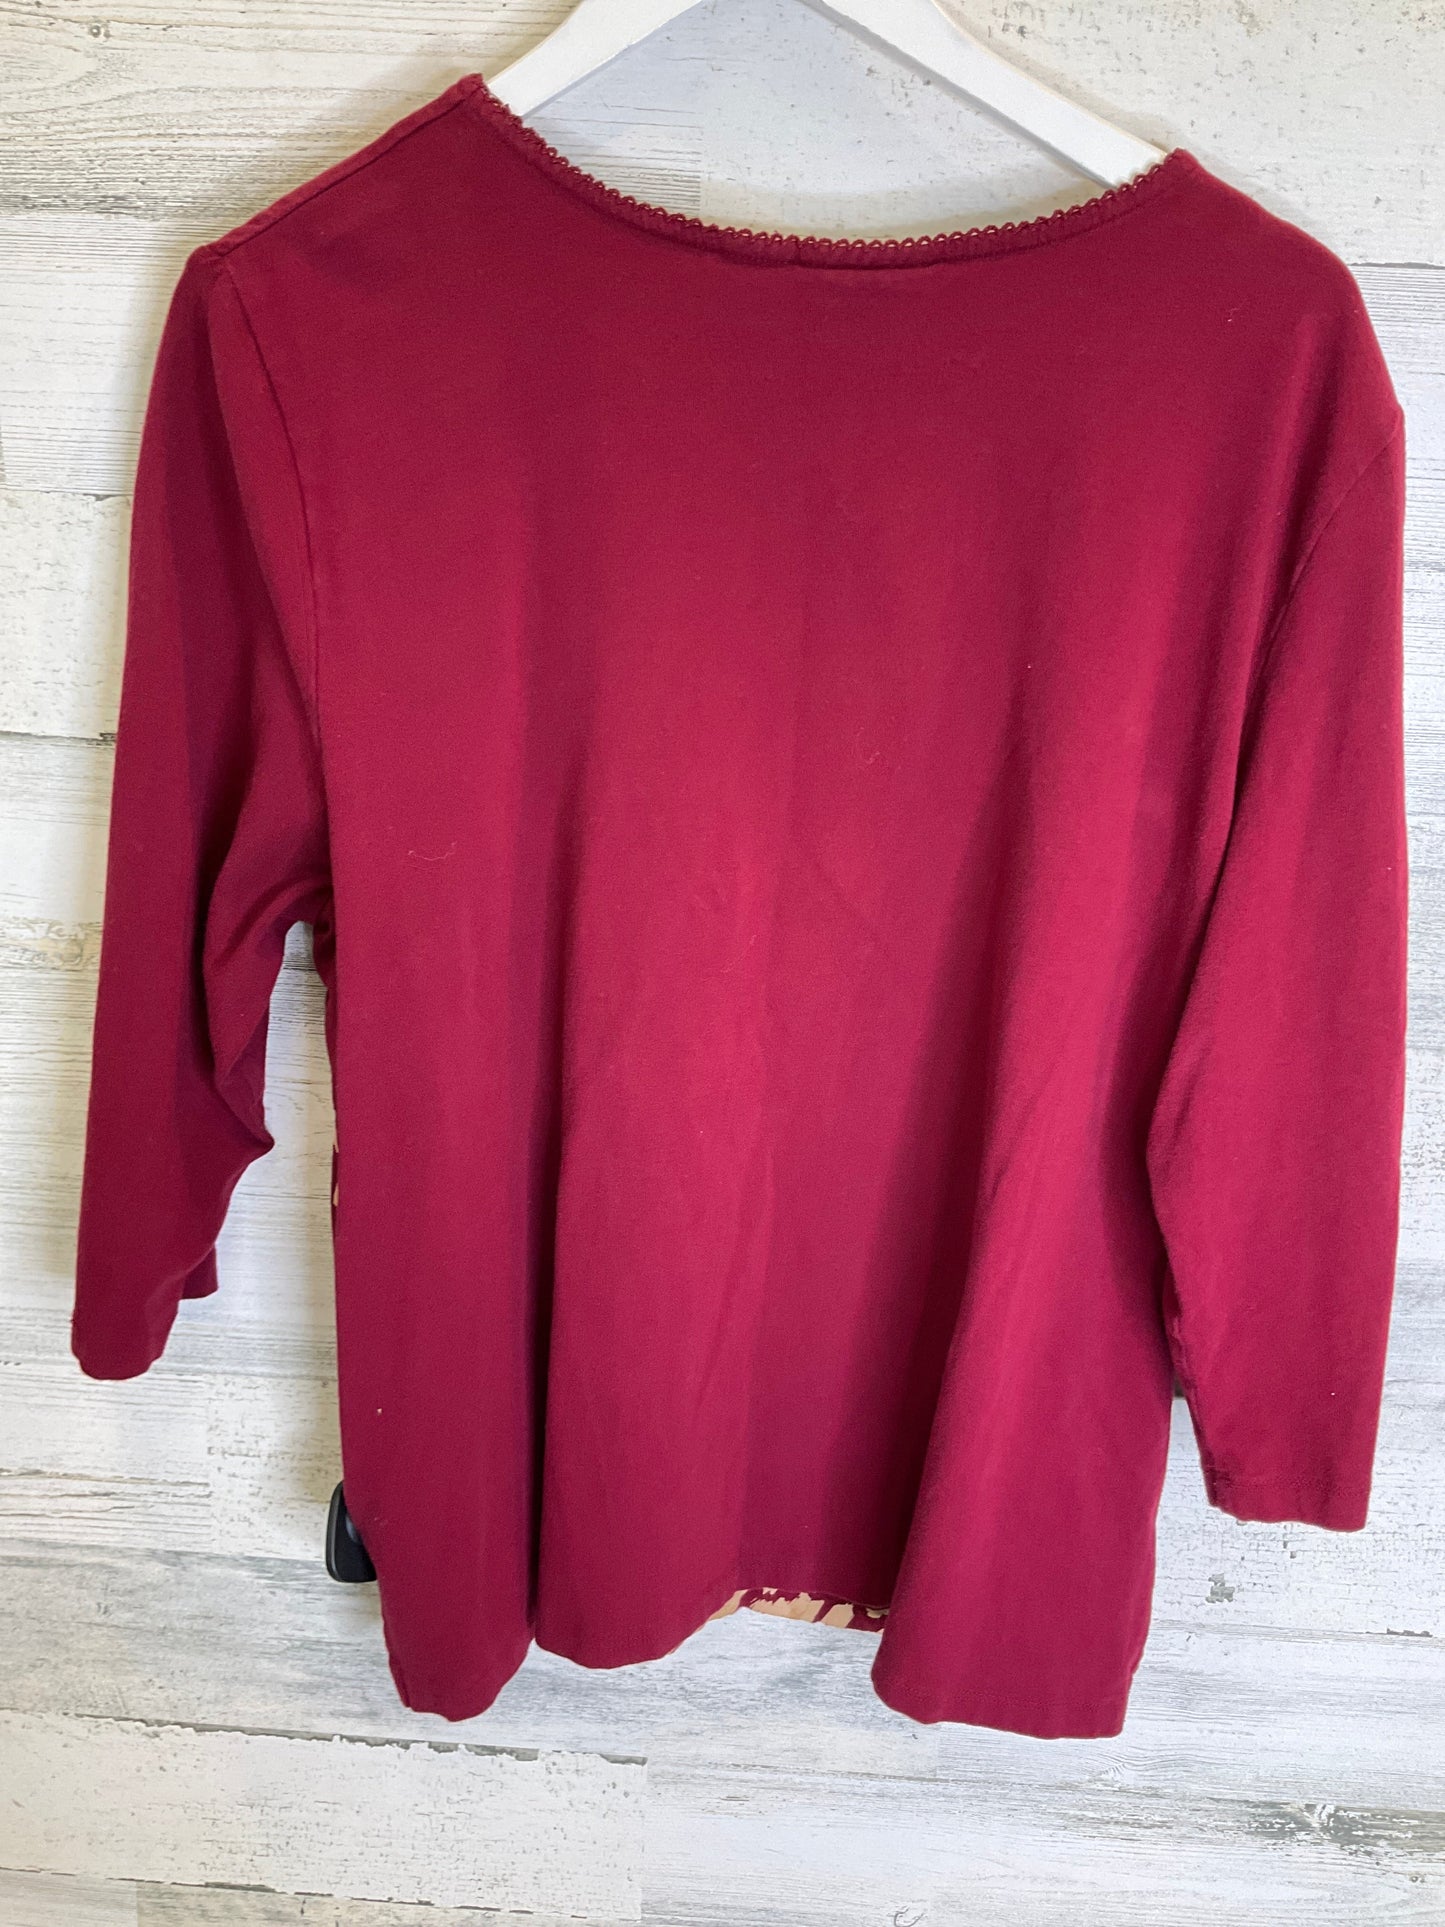 Red Top 3/4 Sleeve Alfred Dunner, Size Xl